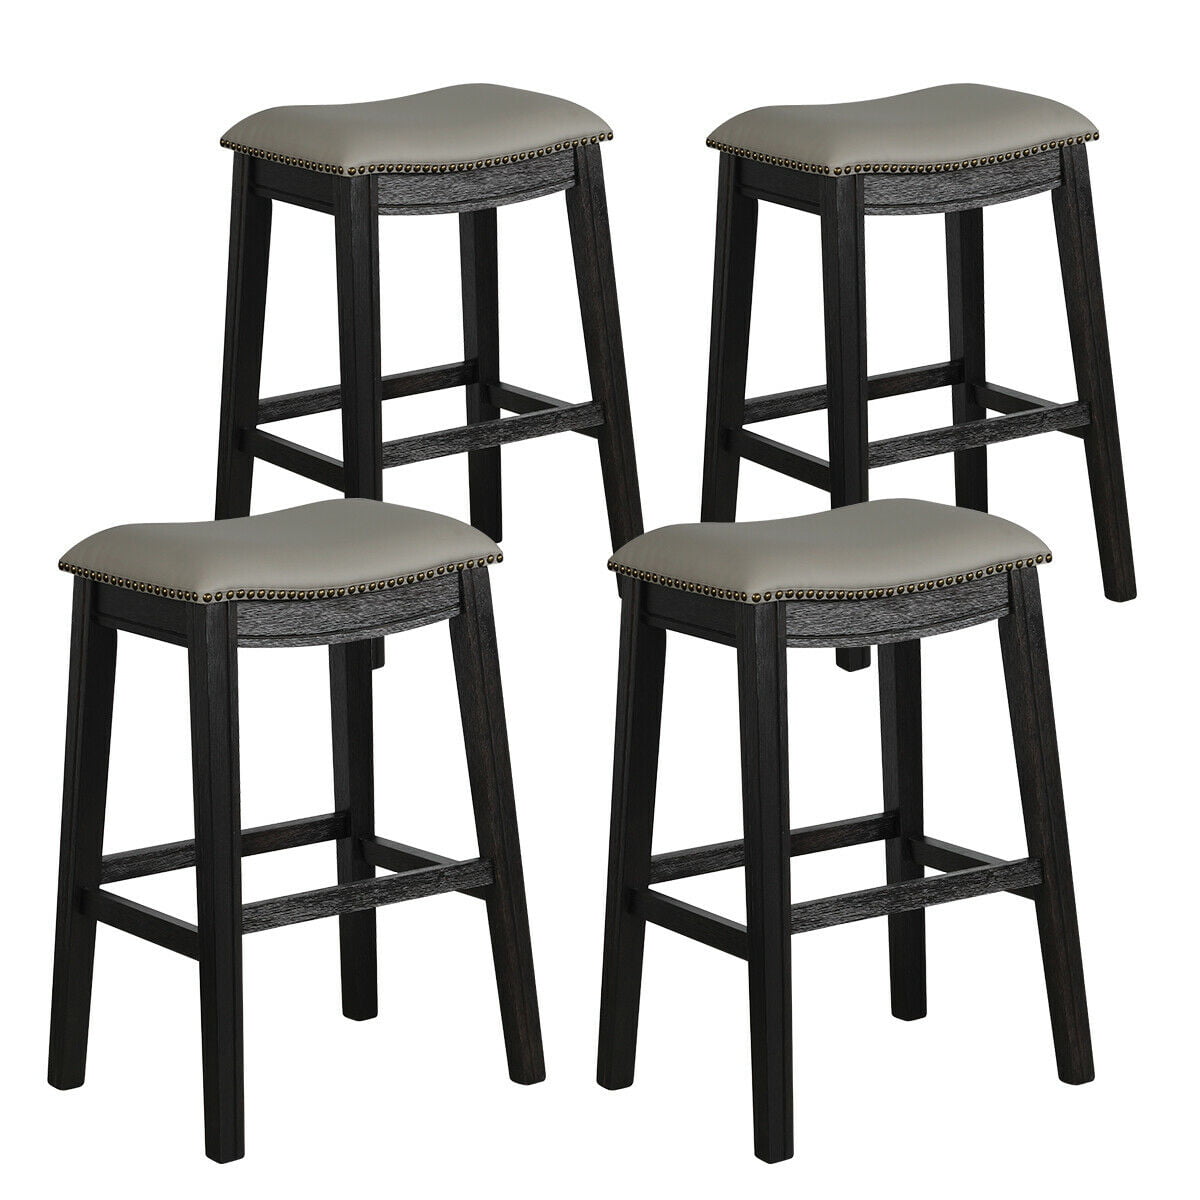 Top Black Set Of 4 Kitchen Counter, Counter Stool Leather And Wood